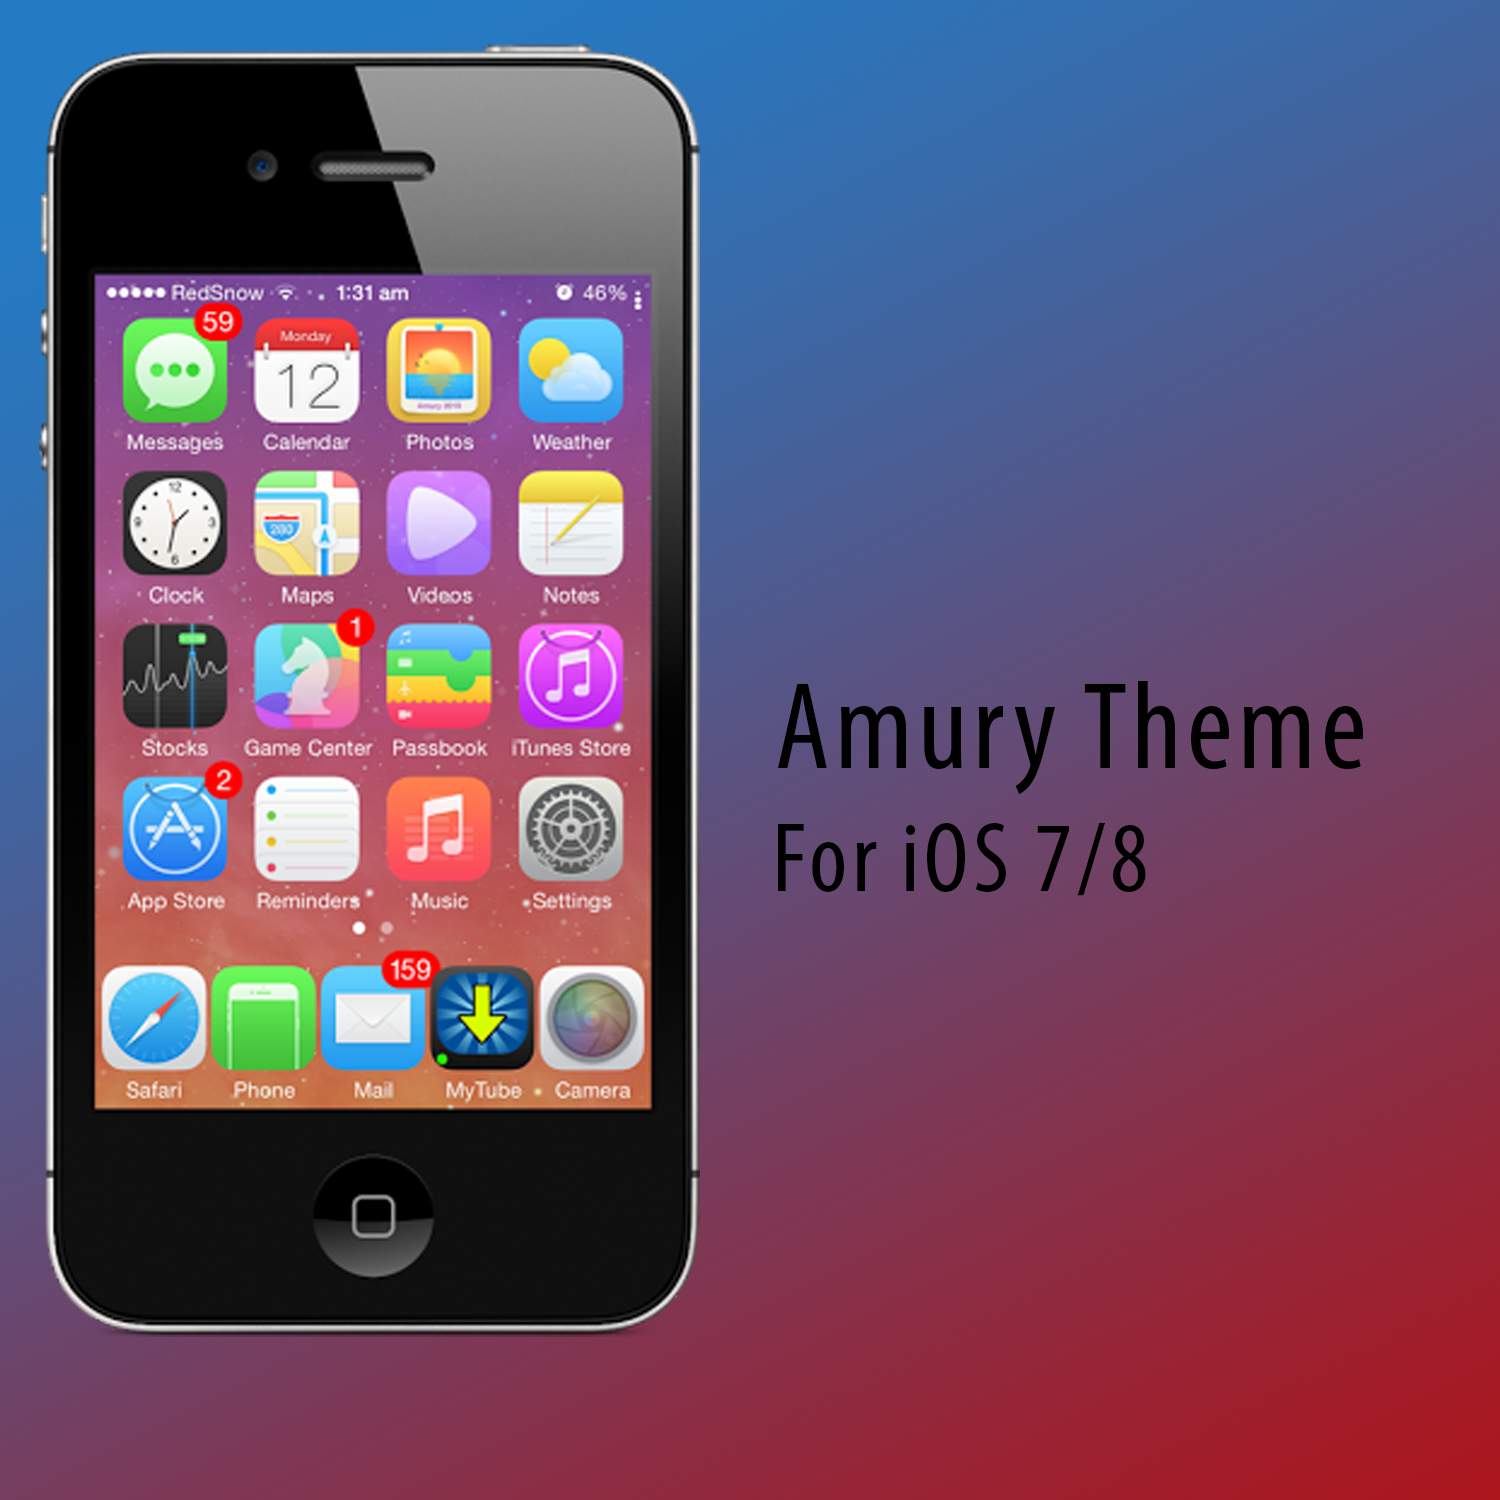 Amury theme brings your iOS experience to life